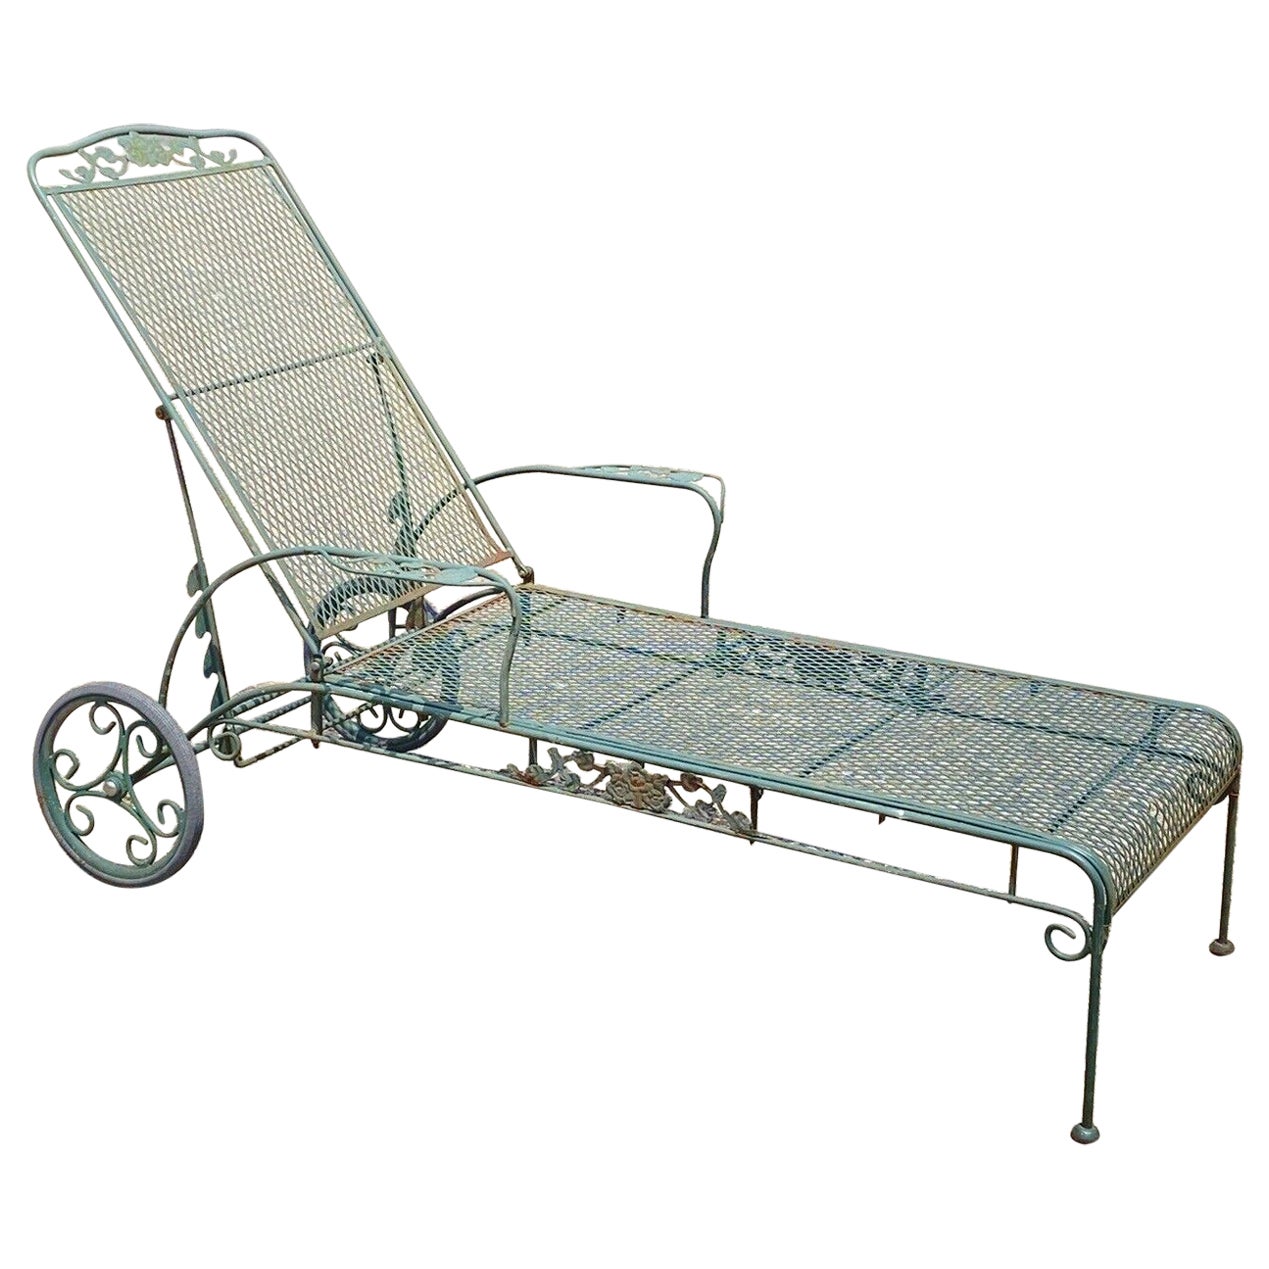 Vintage Meadowcraft Dogwood Green Wrought Iron Outdoor Patio Chaise Lounge Chair